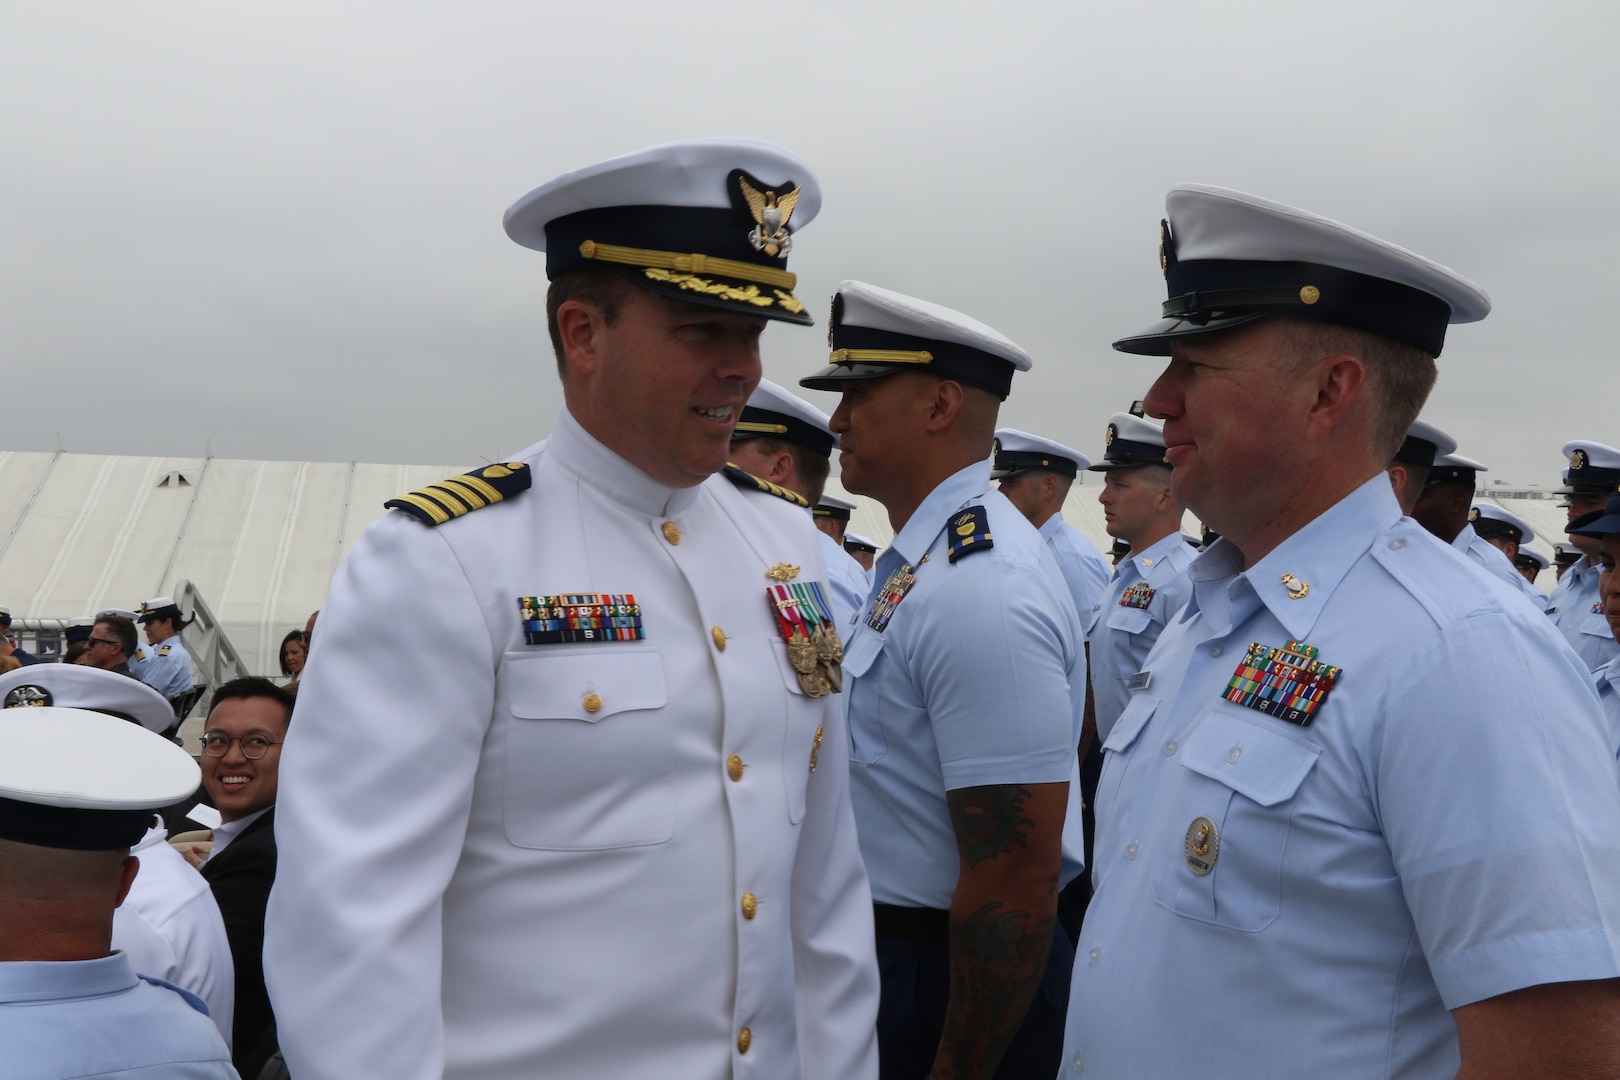 Capt. Rula Deisher and Capt. James O’Mara (pictured) conduct a personnel inspection during the U.S. Coast Guard Cutter Munro’s (WMSL 755) change of command ceremony in San Diego on May 30, 2024. Vice Adm. Andrew J. Tiongson, Commander, U.S. Coast Guard Pacific Area, presided over the ceremony in which O’Mara relieved Deisher as Munro’s commanding officer. U.S. Coast Guard photo by Ensign Samika Lewis.